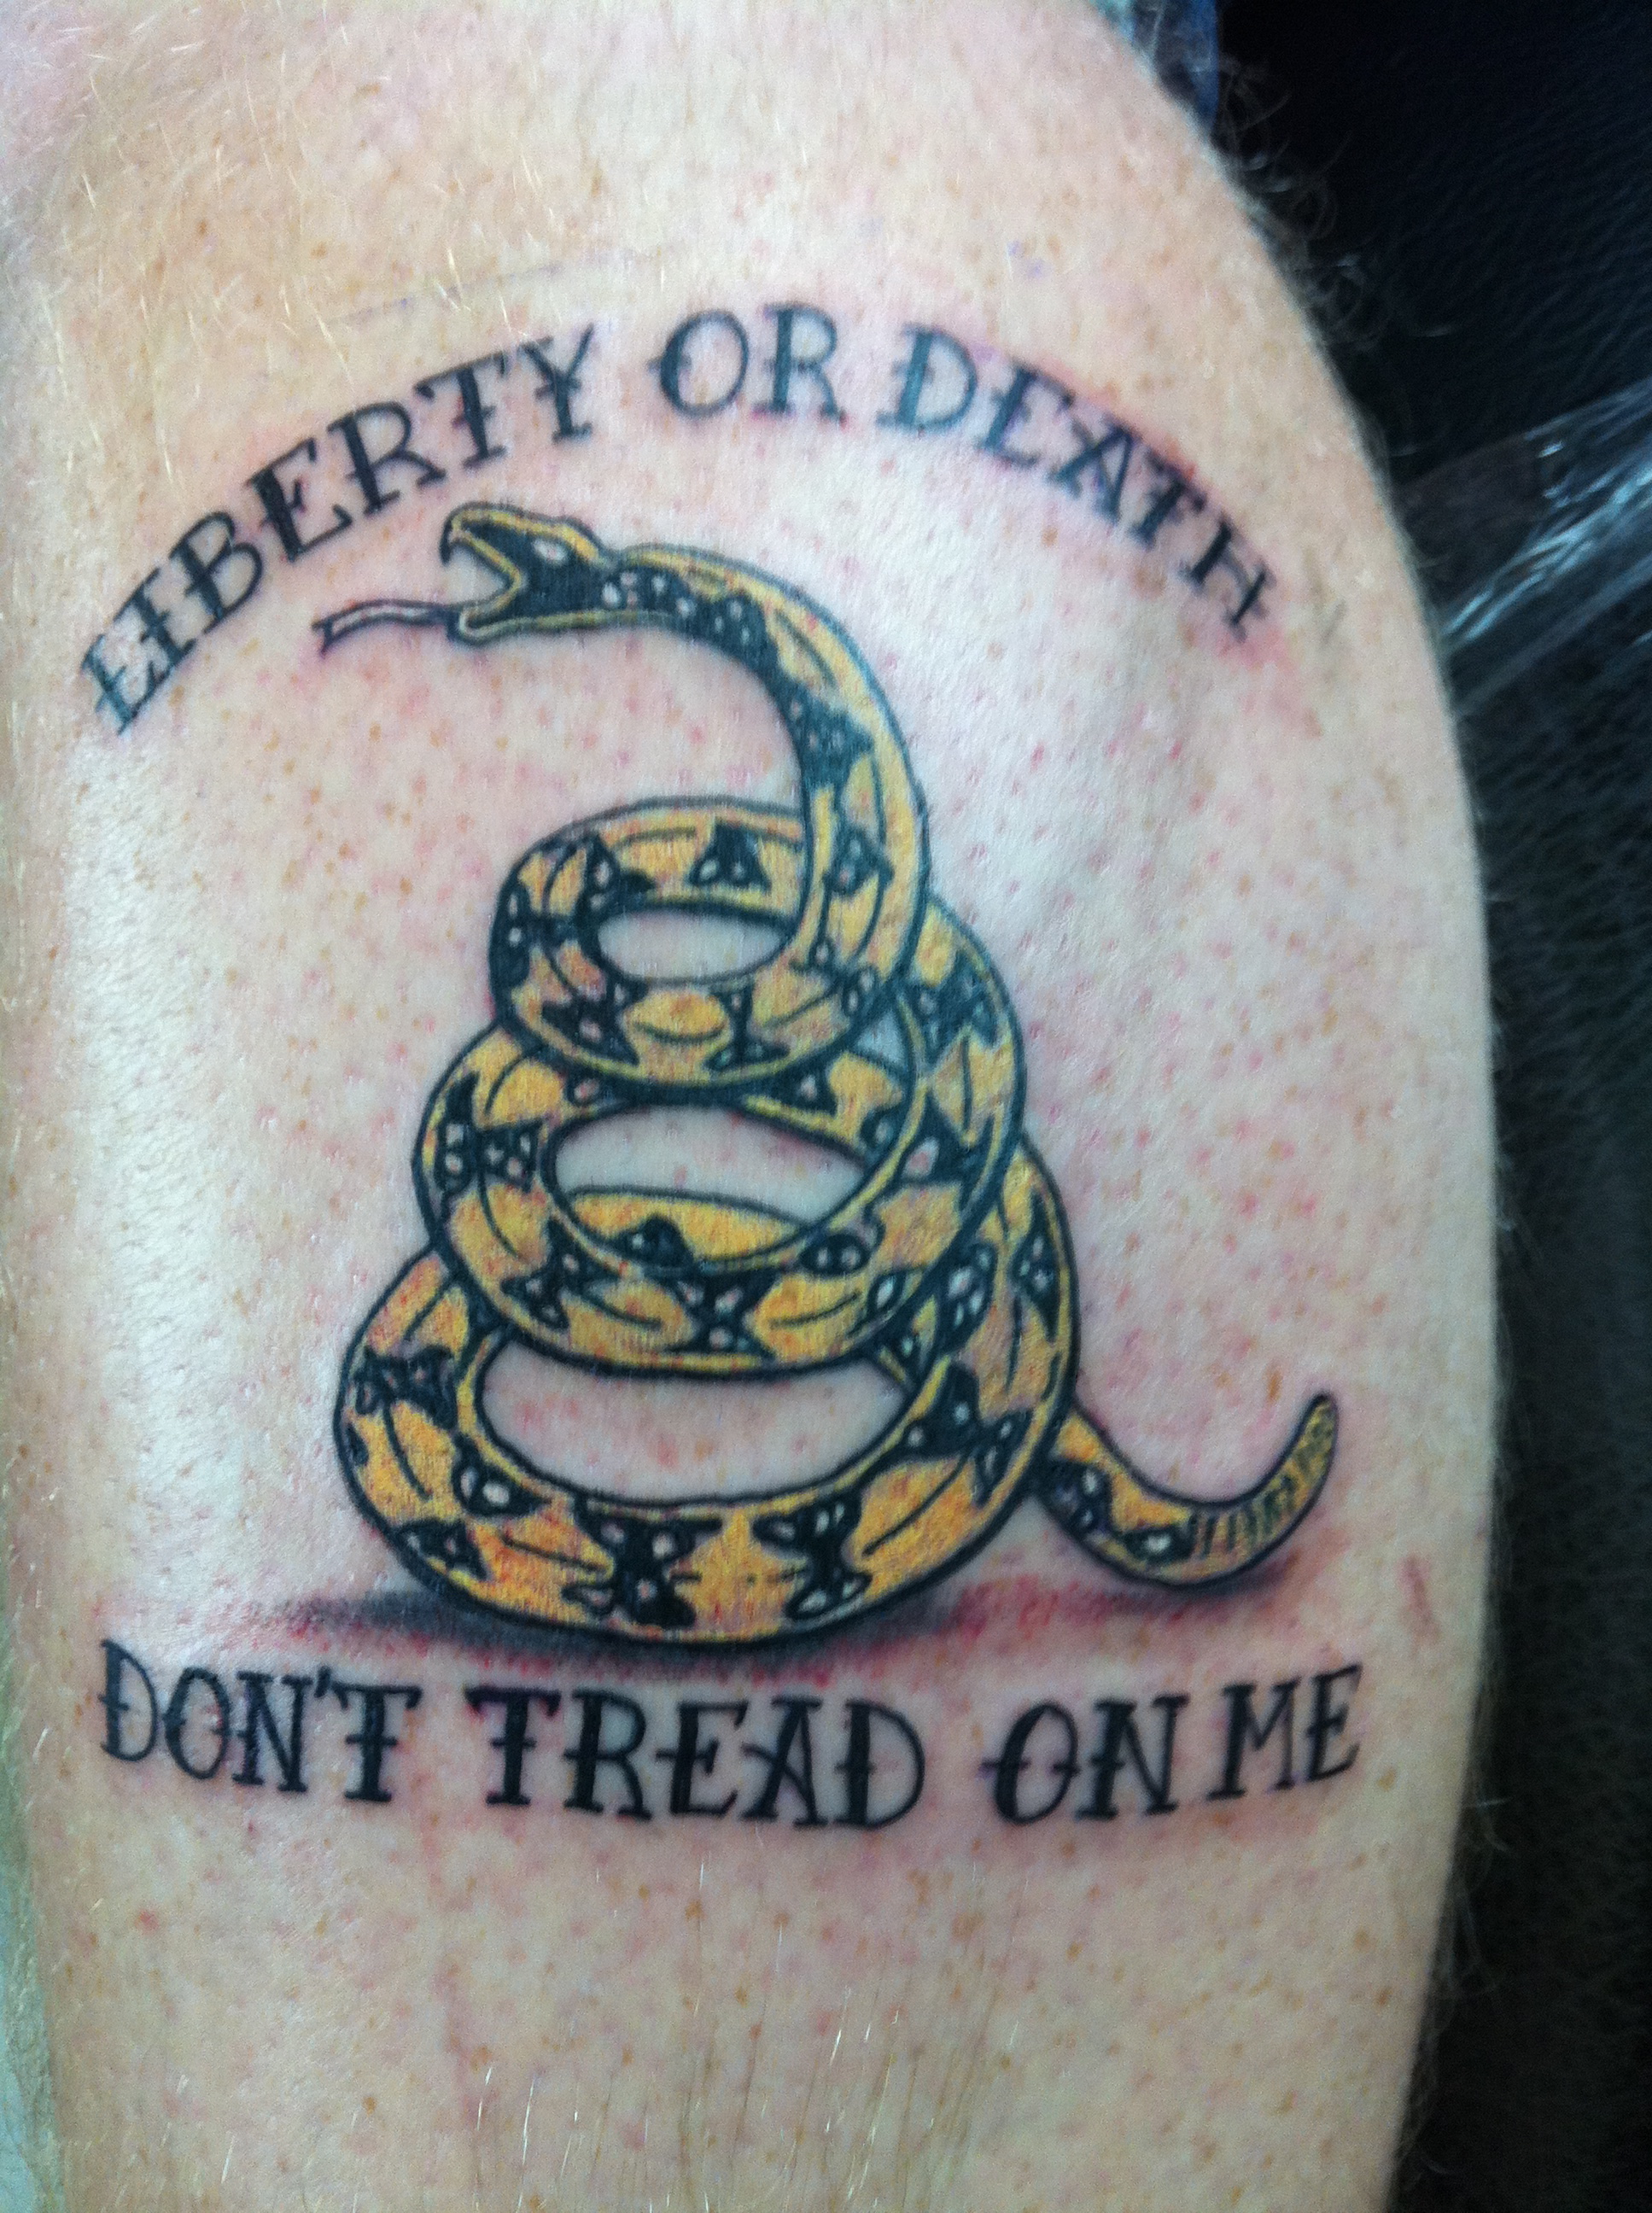 Don t Tread On Me Tattoos Designs, Ideas and Meaning | Tattoos For You